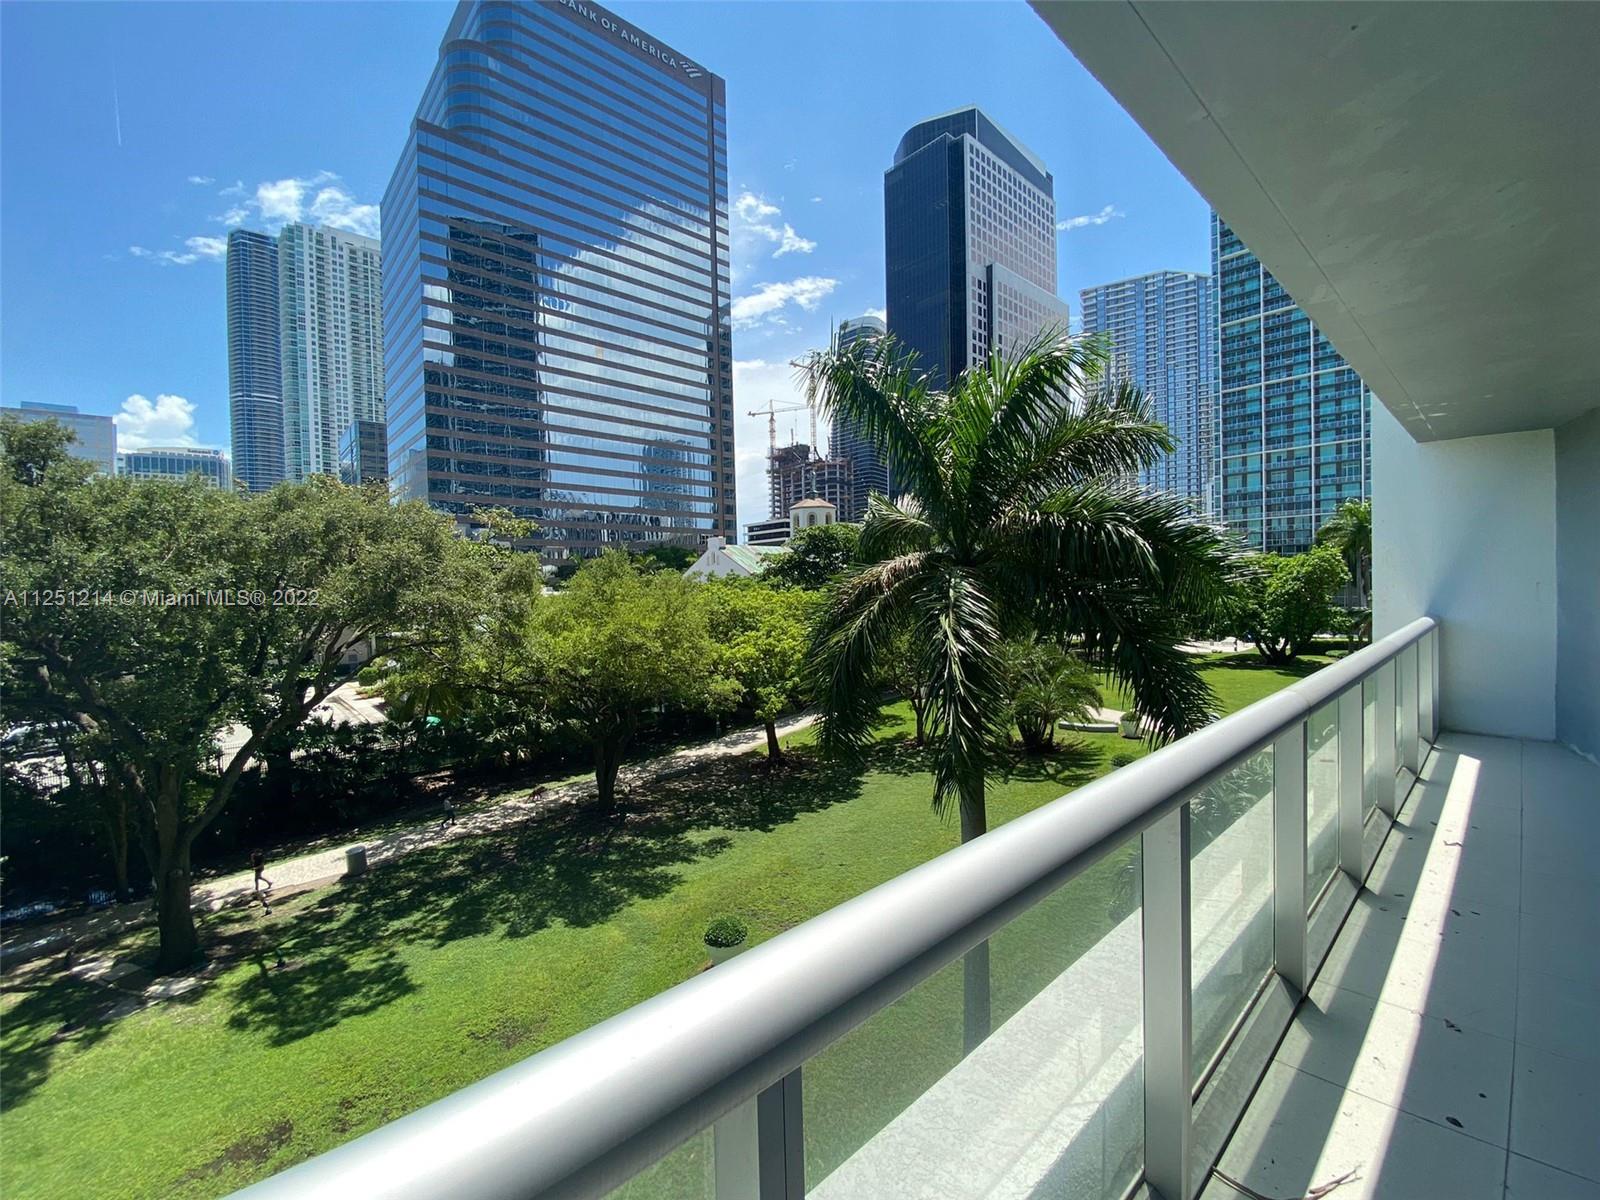 Live in this beautiful spacious 1035 sq/ft 1/1 unit at ICON BRICKELL. Gorgeous apartment with pleasant garden views. Porcelain floors throughout. Italian kitchen with a Wolf stove and a Subzero refrigerator. This unit is the biggest one bedroom in Icon II. The building offers 5 star amenities. Indulge in luxury spa services at the 28,000-square-foot Icon Brickell Spa, showcasing a water lounge, fitness center, steam room and sauna- spa and fitness center, movie theater, game room, café with poolside food and beverage service, poolside towel service, concierge and valet parking. Additionally, Icon Brickell has on-site, dining options such as Cipriani and Cantina la Veinte.